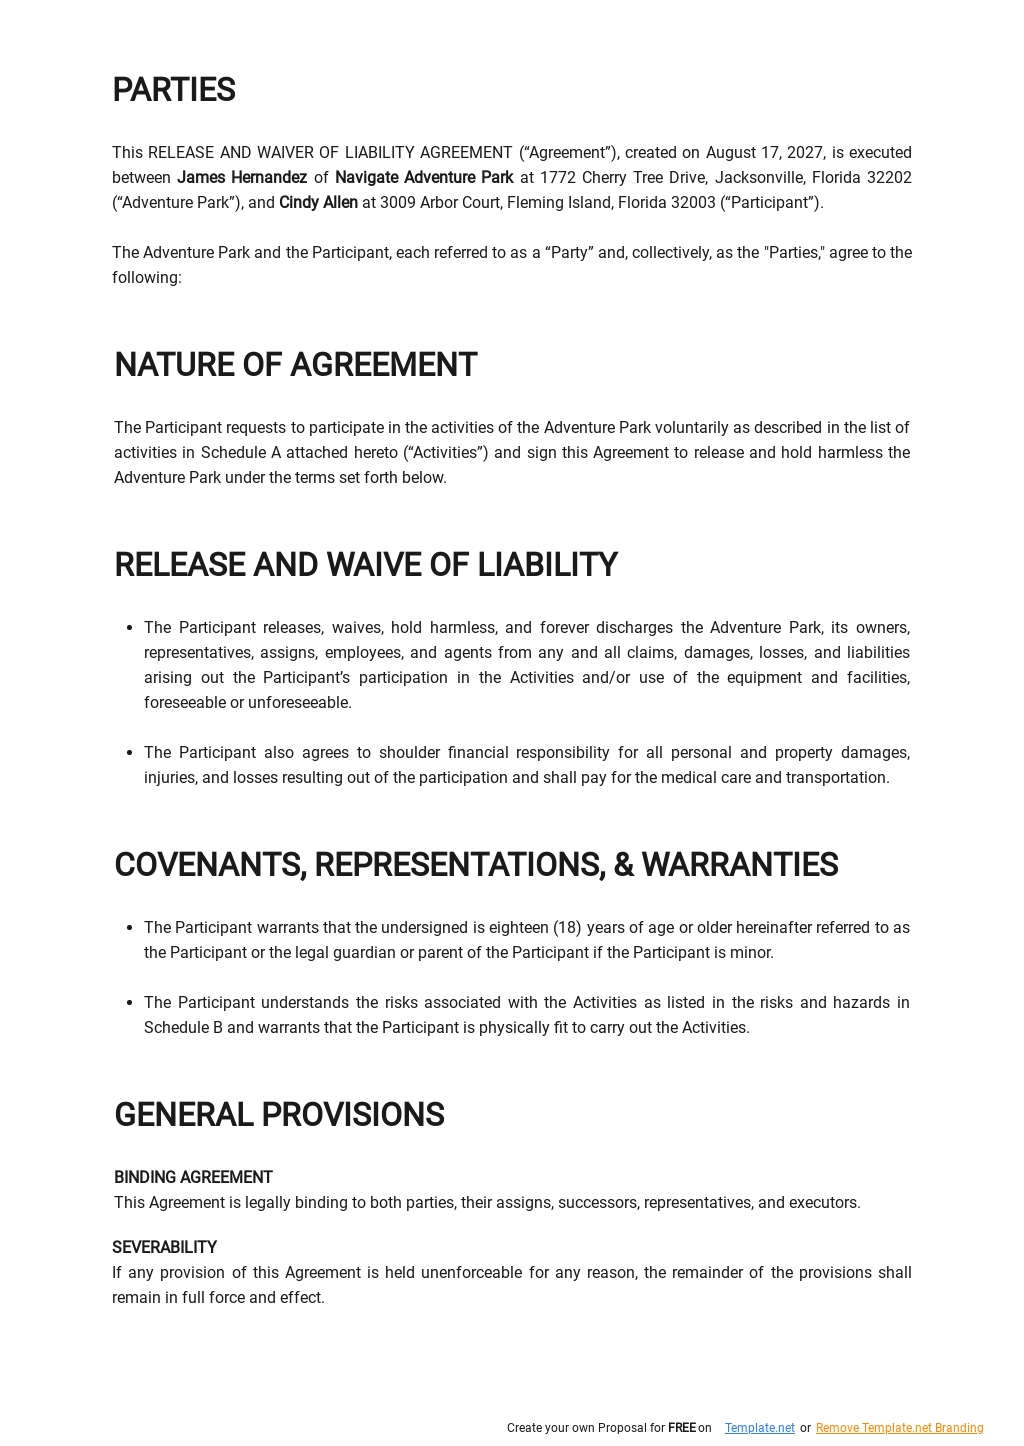 Release And Waiver Of Liability Agreement Template 1.jpe